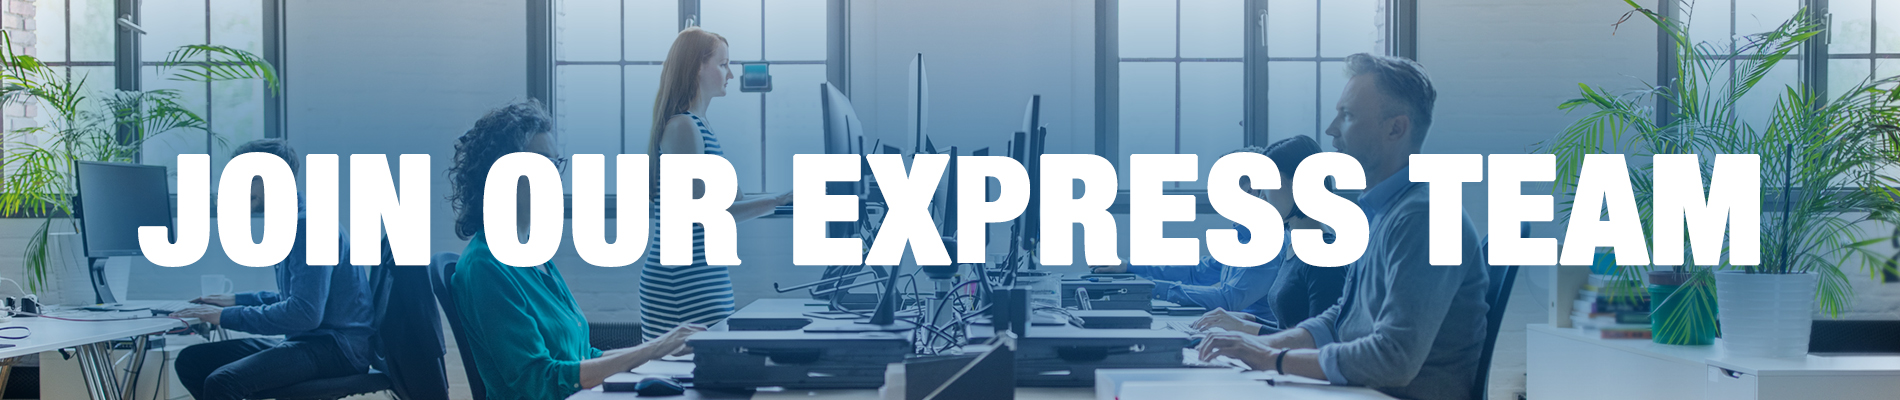 Join Our Express Team - Express Careers